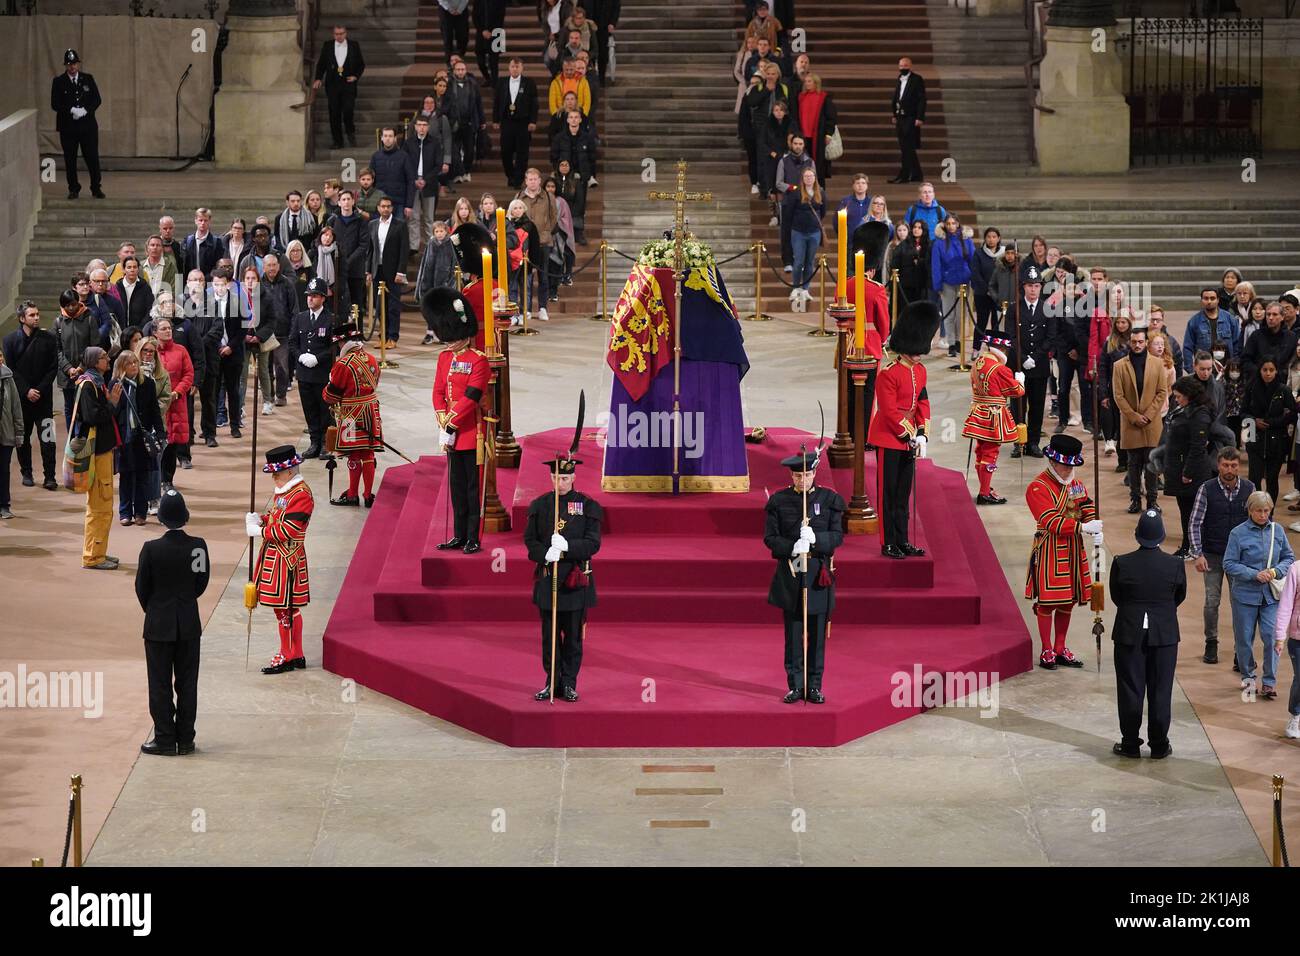 At 4.57am on the day of her funeral the final members of the public pay their respects at the coffin of Queen Elizabeth II, draped in the Royal Standard with the Imperial State Crown and the Sovereign's orb and sceptre, lying in state on the catafalque in Westminster Hall, at the Palace of Westminster, London. Picture date: Monday September 19, 2022. Stock Photo